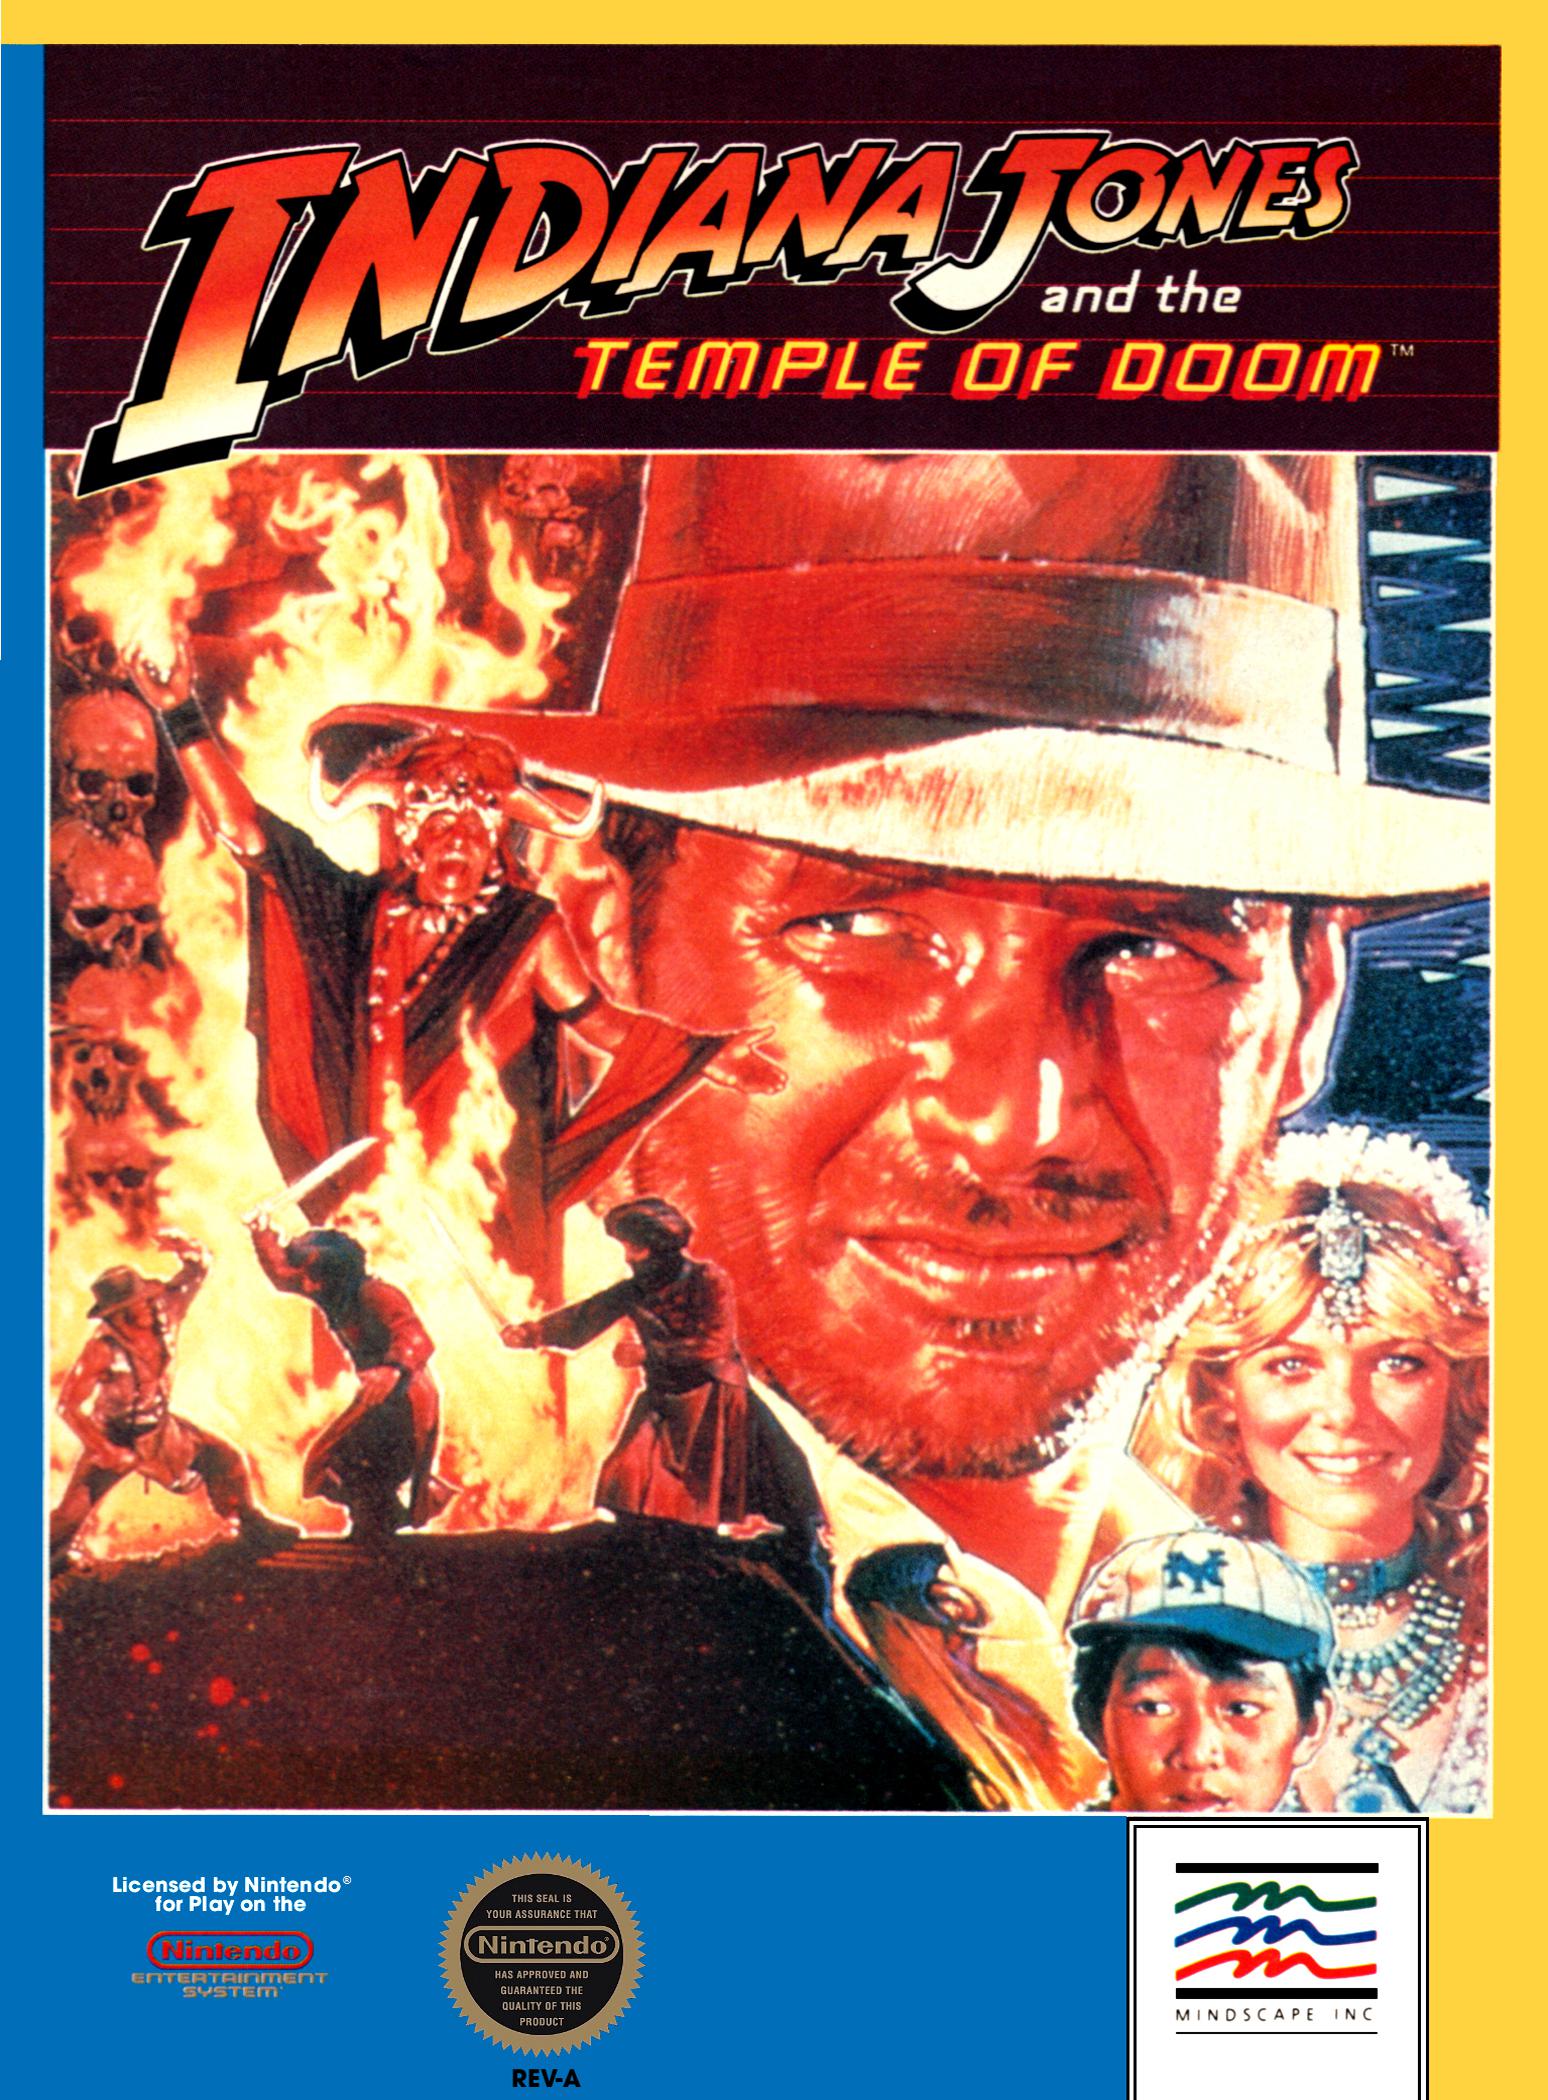 Take on the NES Library » #93 – Indiana Jones and the Temple of Doom